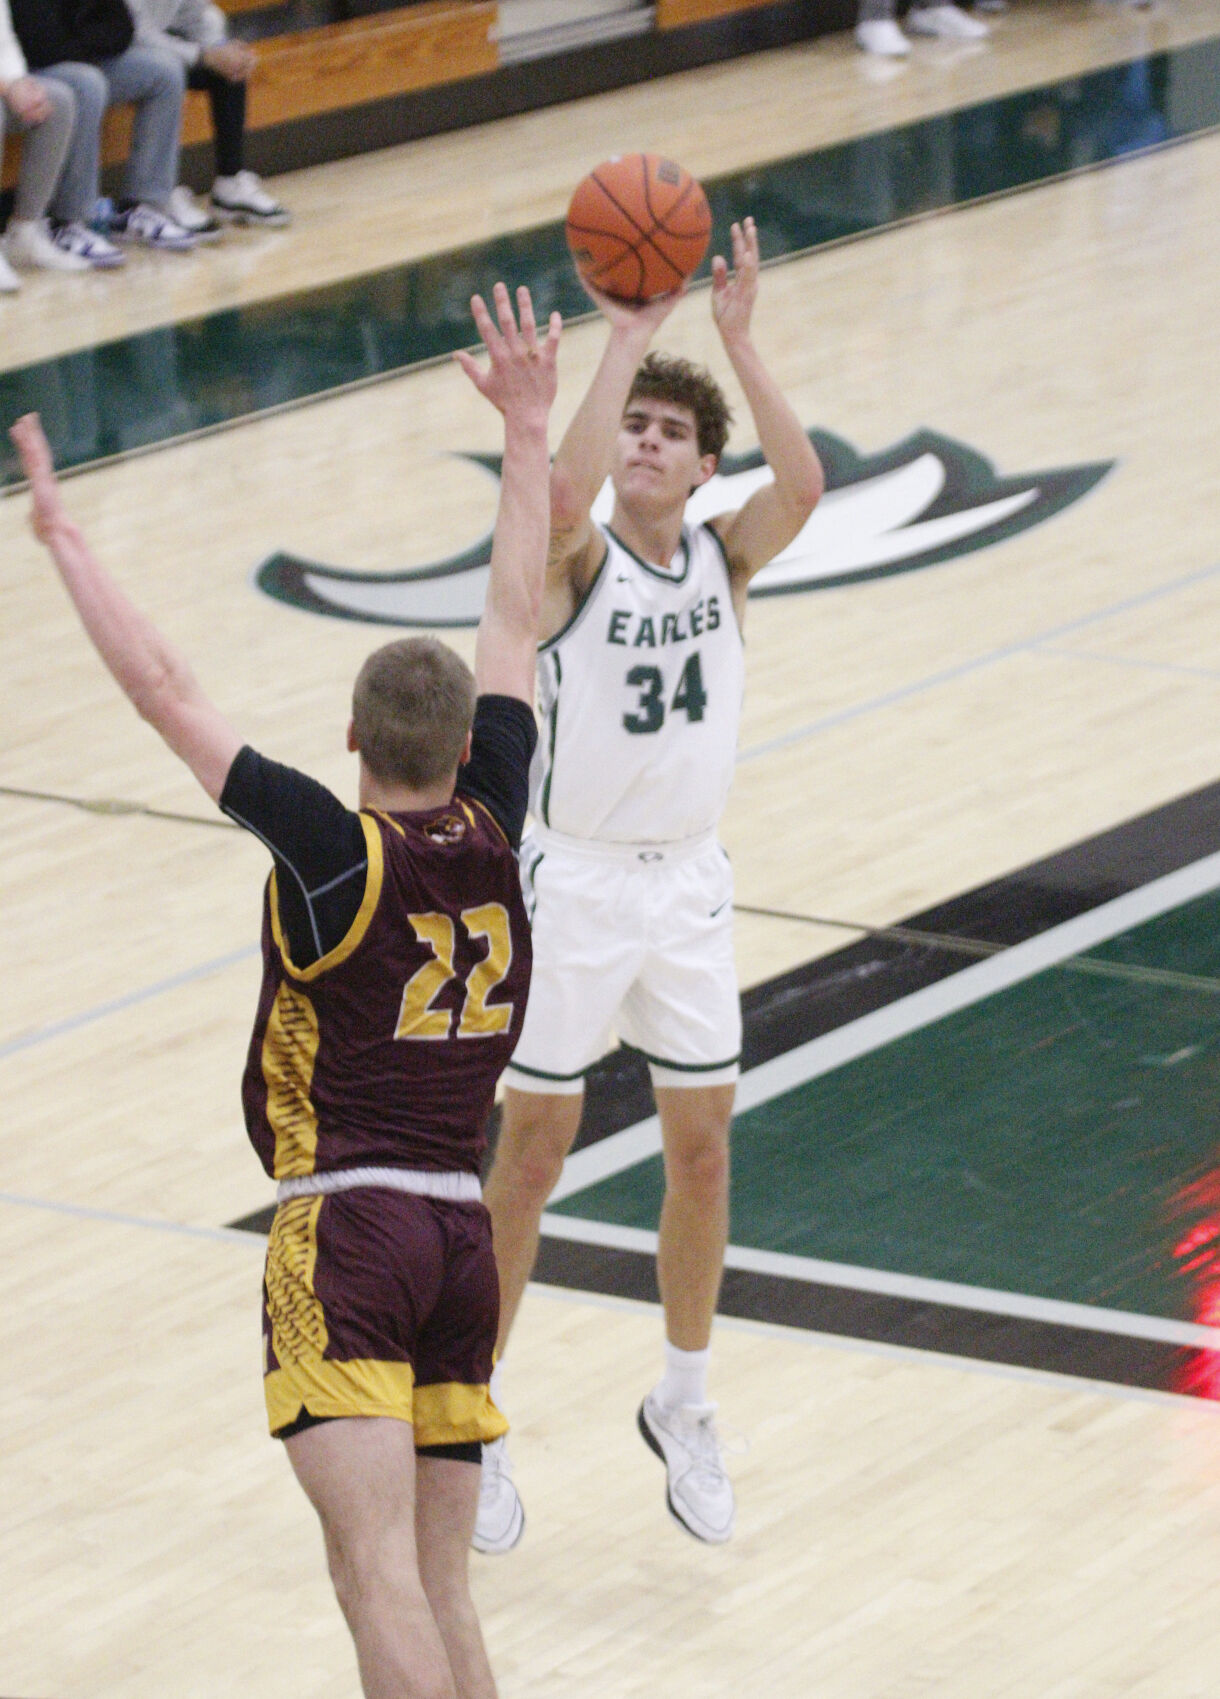 Zionsville Boys Basketball Team’s Remarkable Comeback Victory Over Brebeuf Jesuit: Maguire Mitchell Scores 32 Points